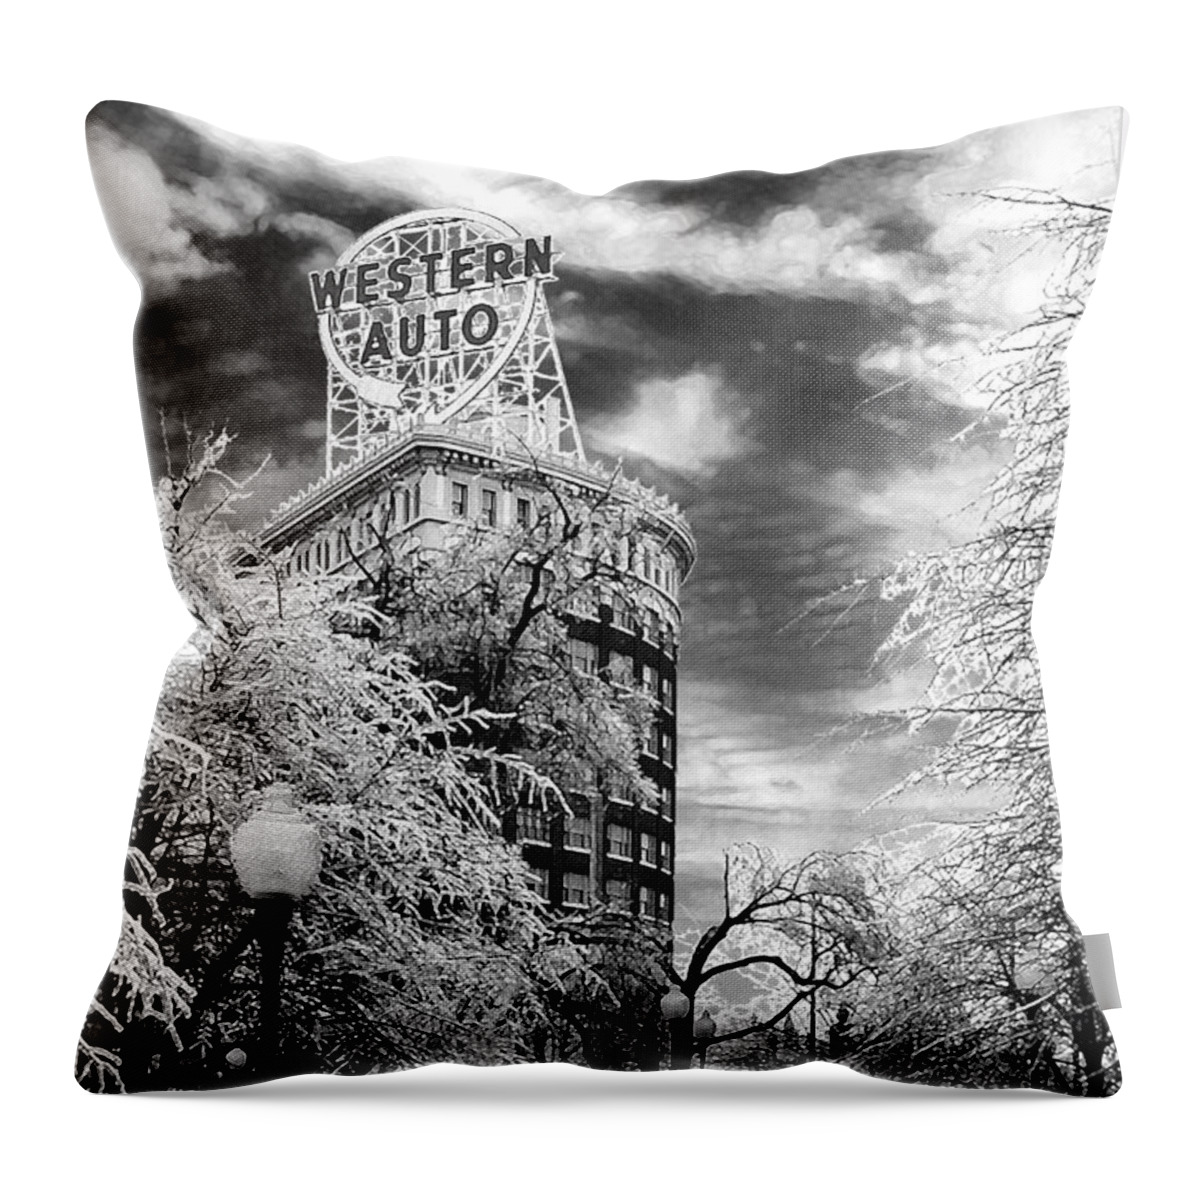 Western Auto Kansas City Throw Pillow featuring the photograph Western Auto In Winter by Steve Karol